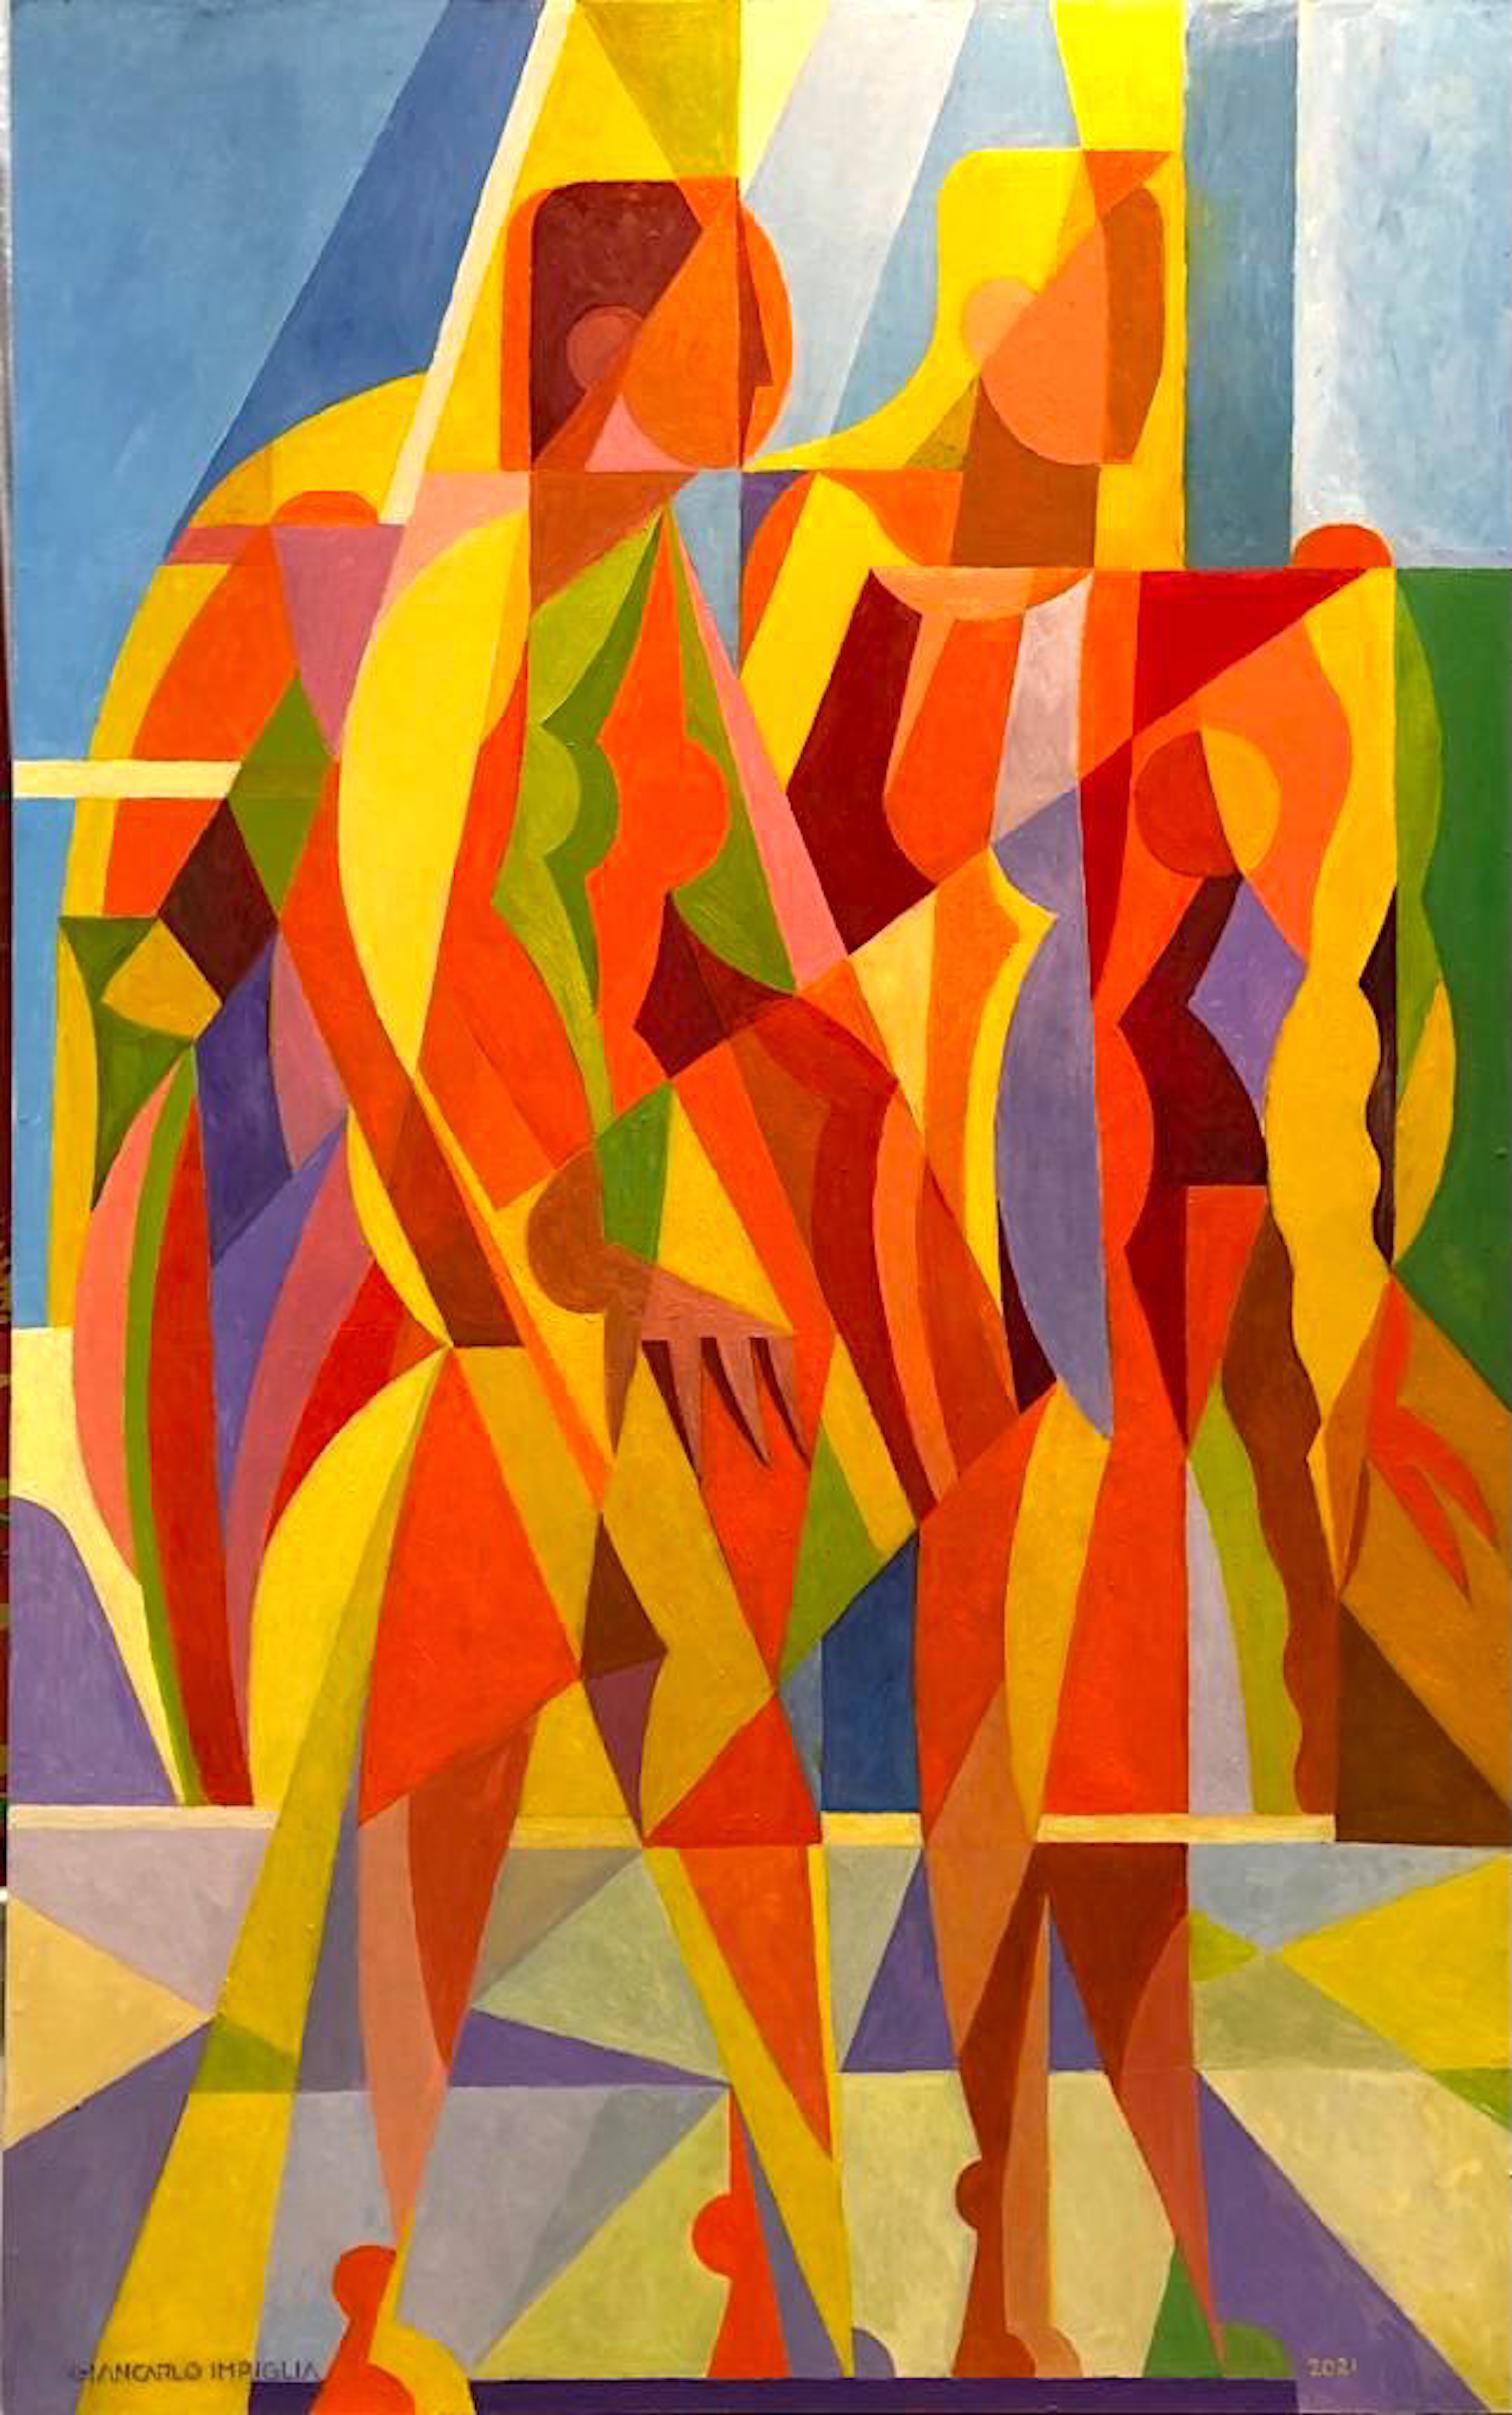 Giancarlo Impiglia Figurative Painting - Beautiful cubist style oil painting "A Day in the Sun" by Impiglia